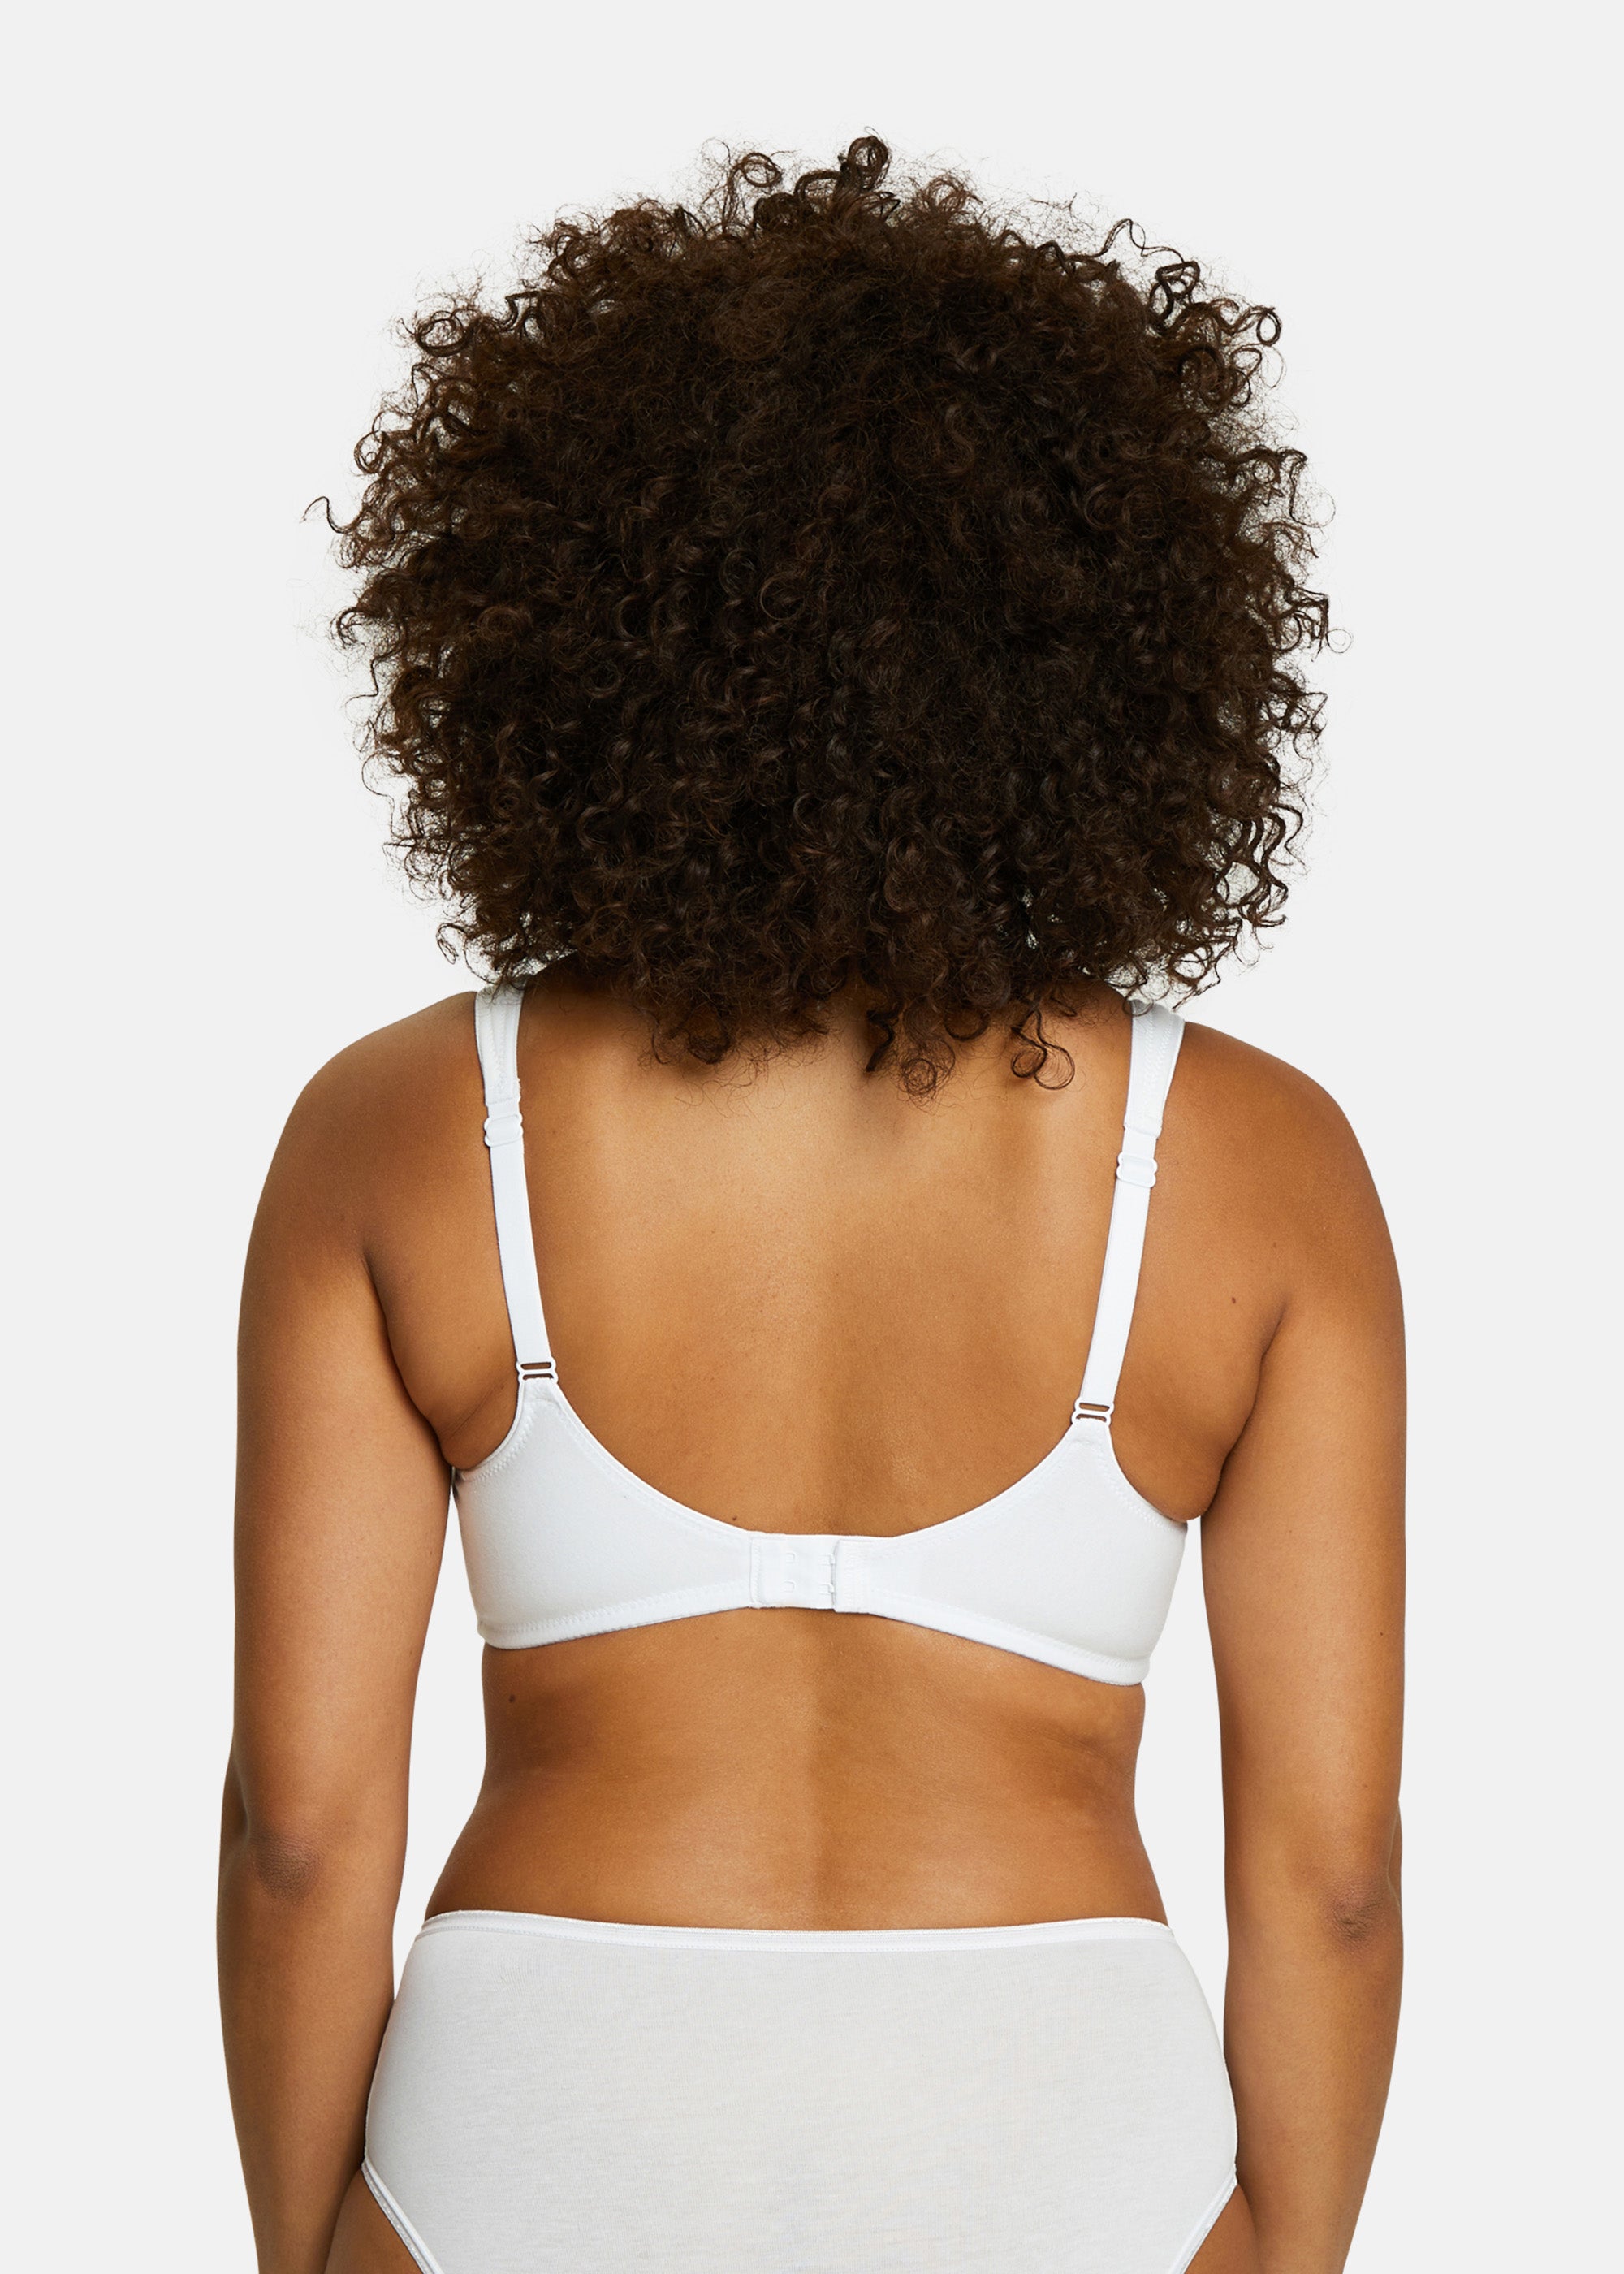 Full cup wireless bra Lucie White